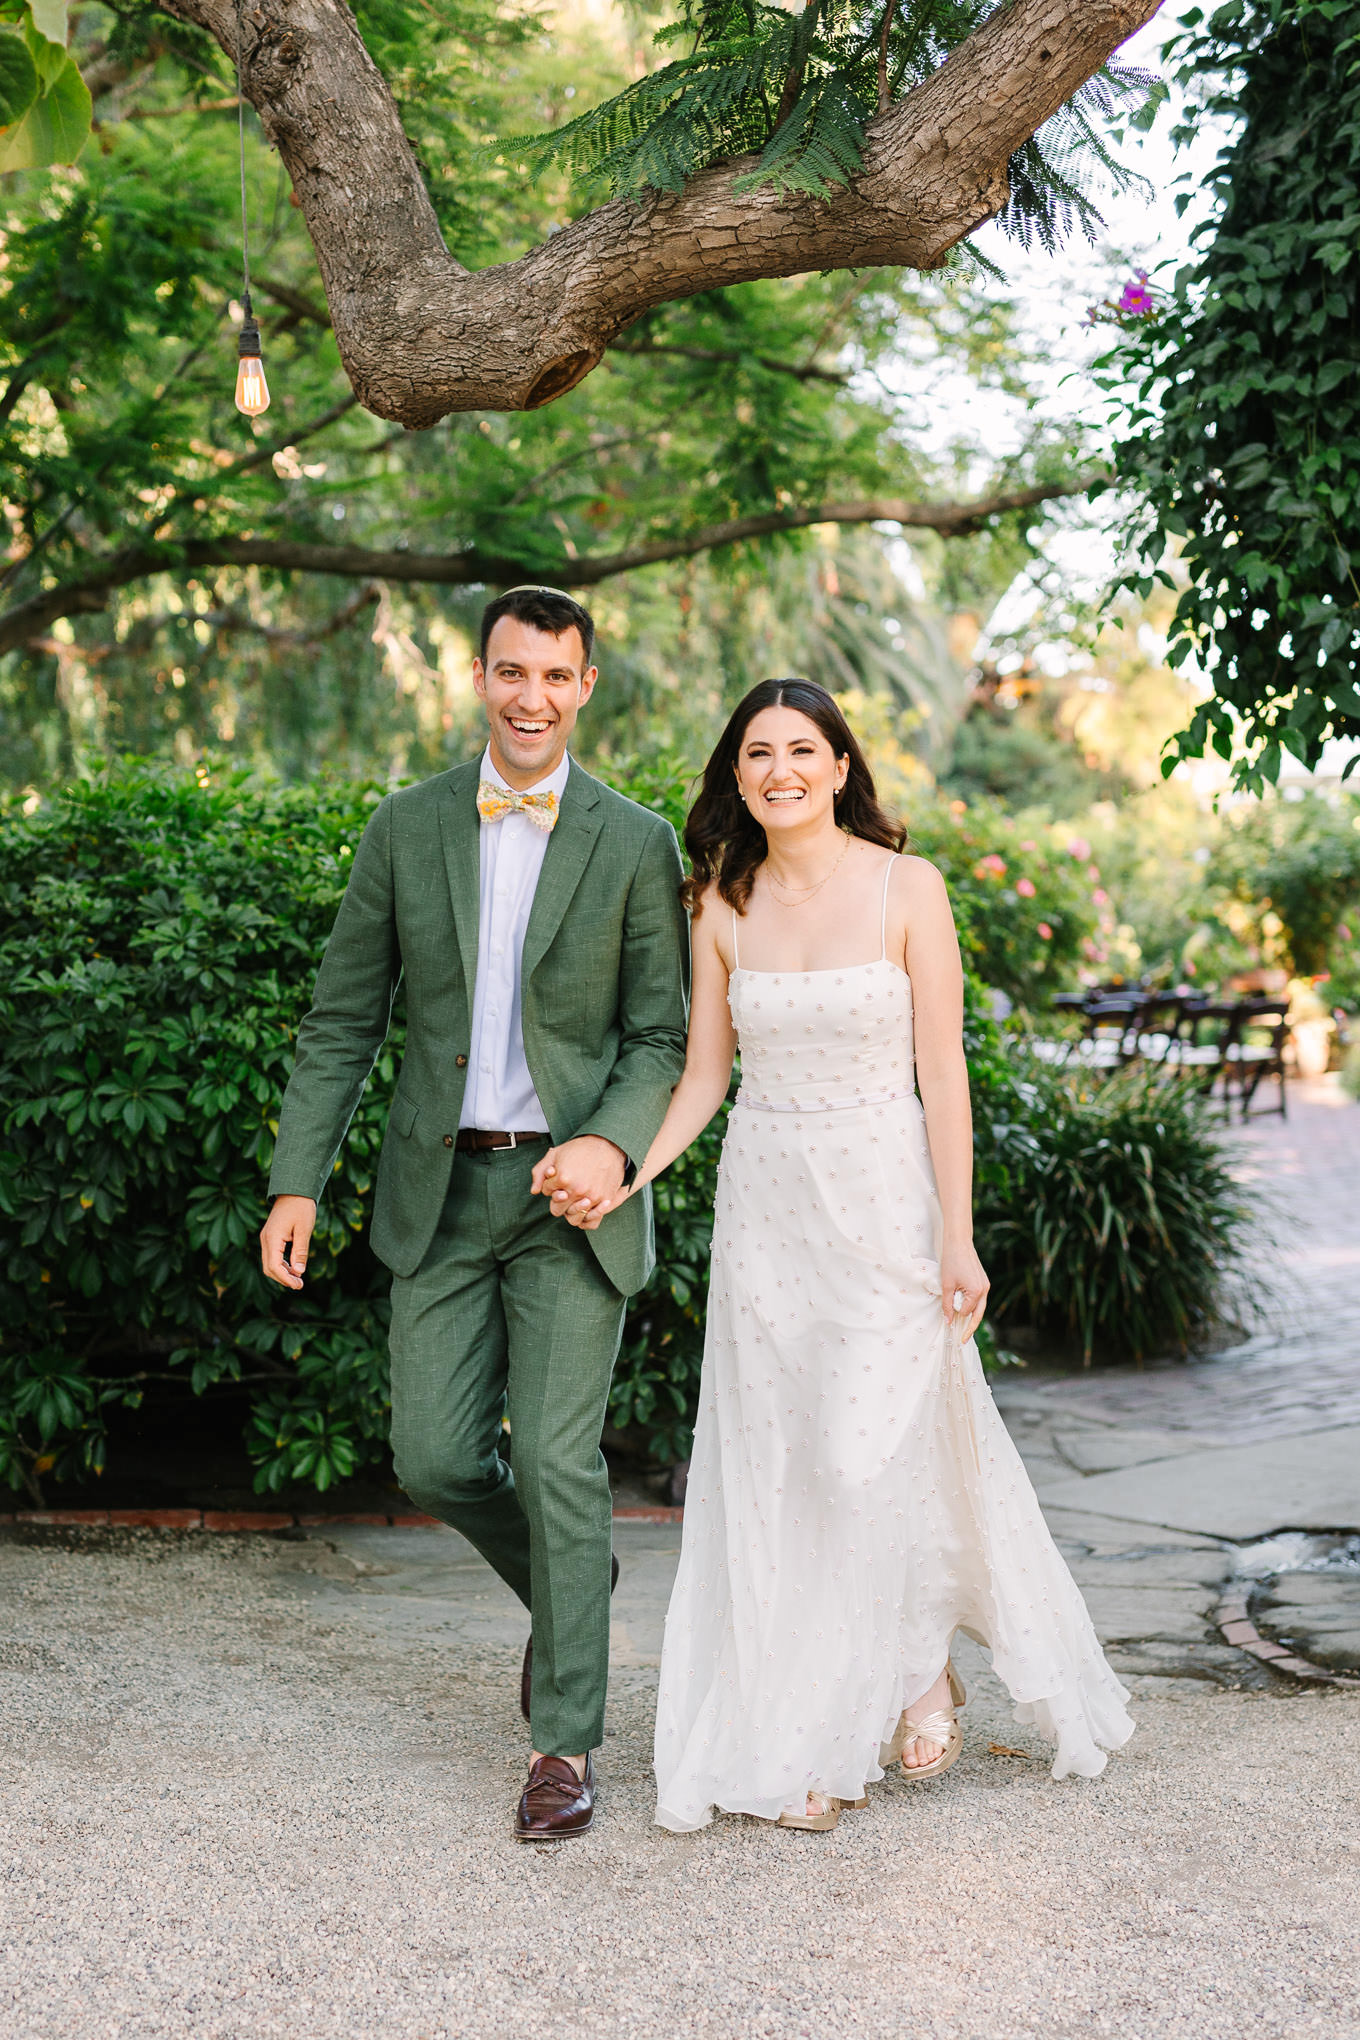 McCormick Home Ranch Wedding | Wedding and elopement photography roundup | Los Angeles and Palm Springs  photographer | #losangeleswedding #palmspringswedding #elopementphotographer

Source: Mary Costa Photography | Los Angeles